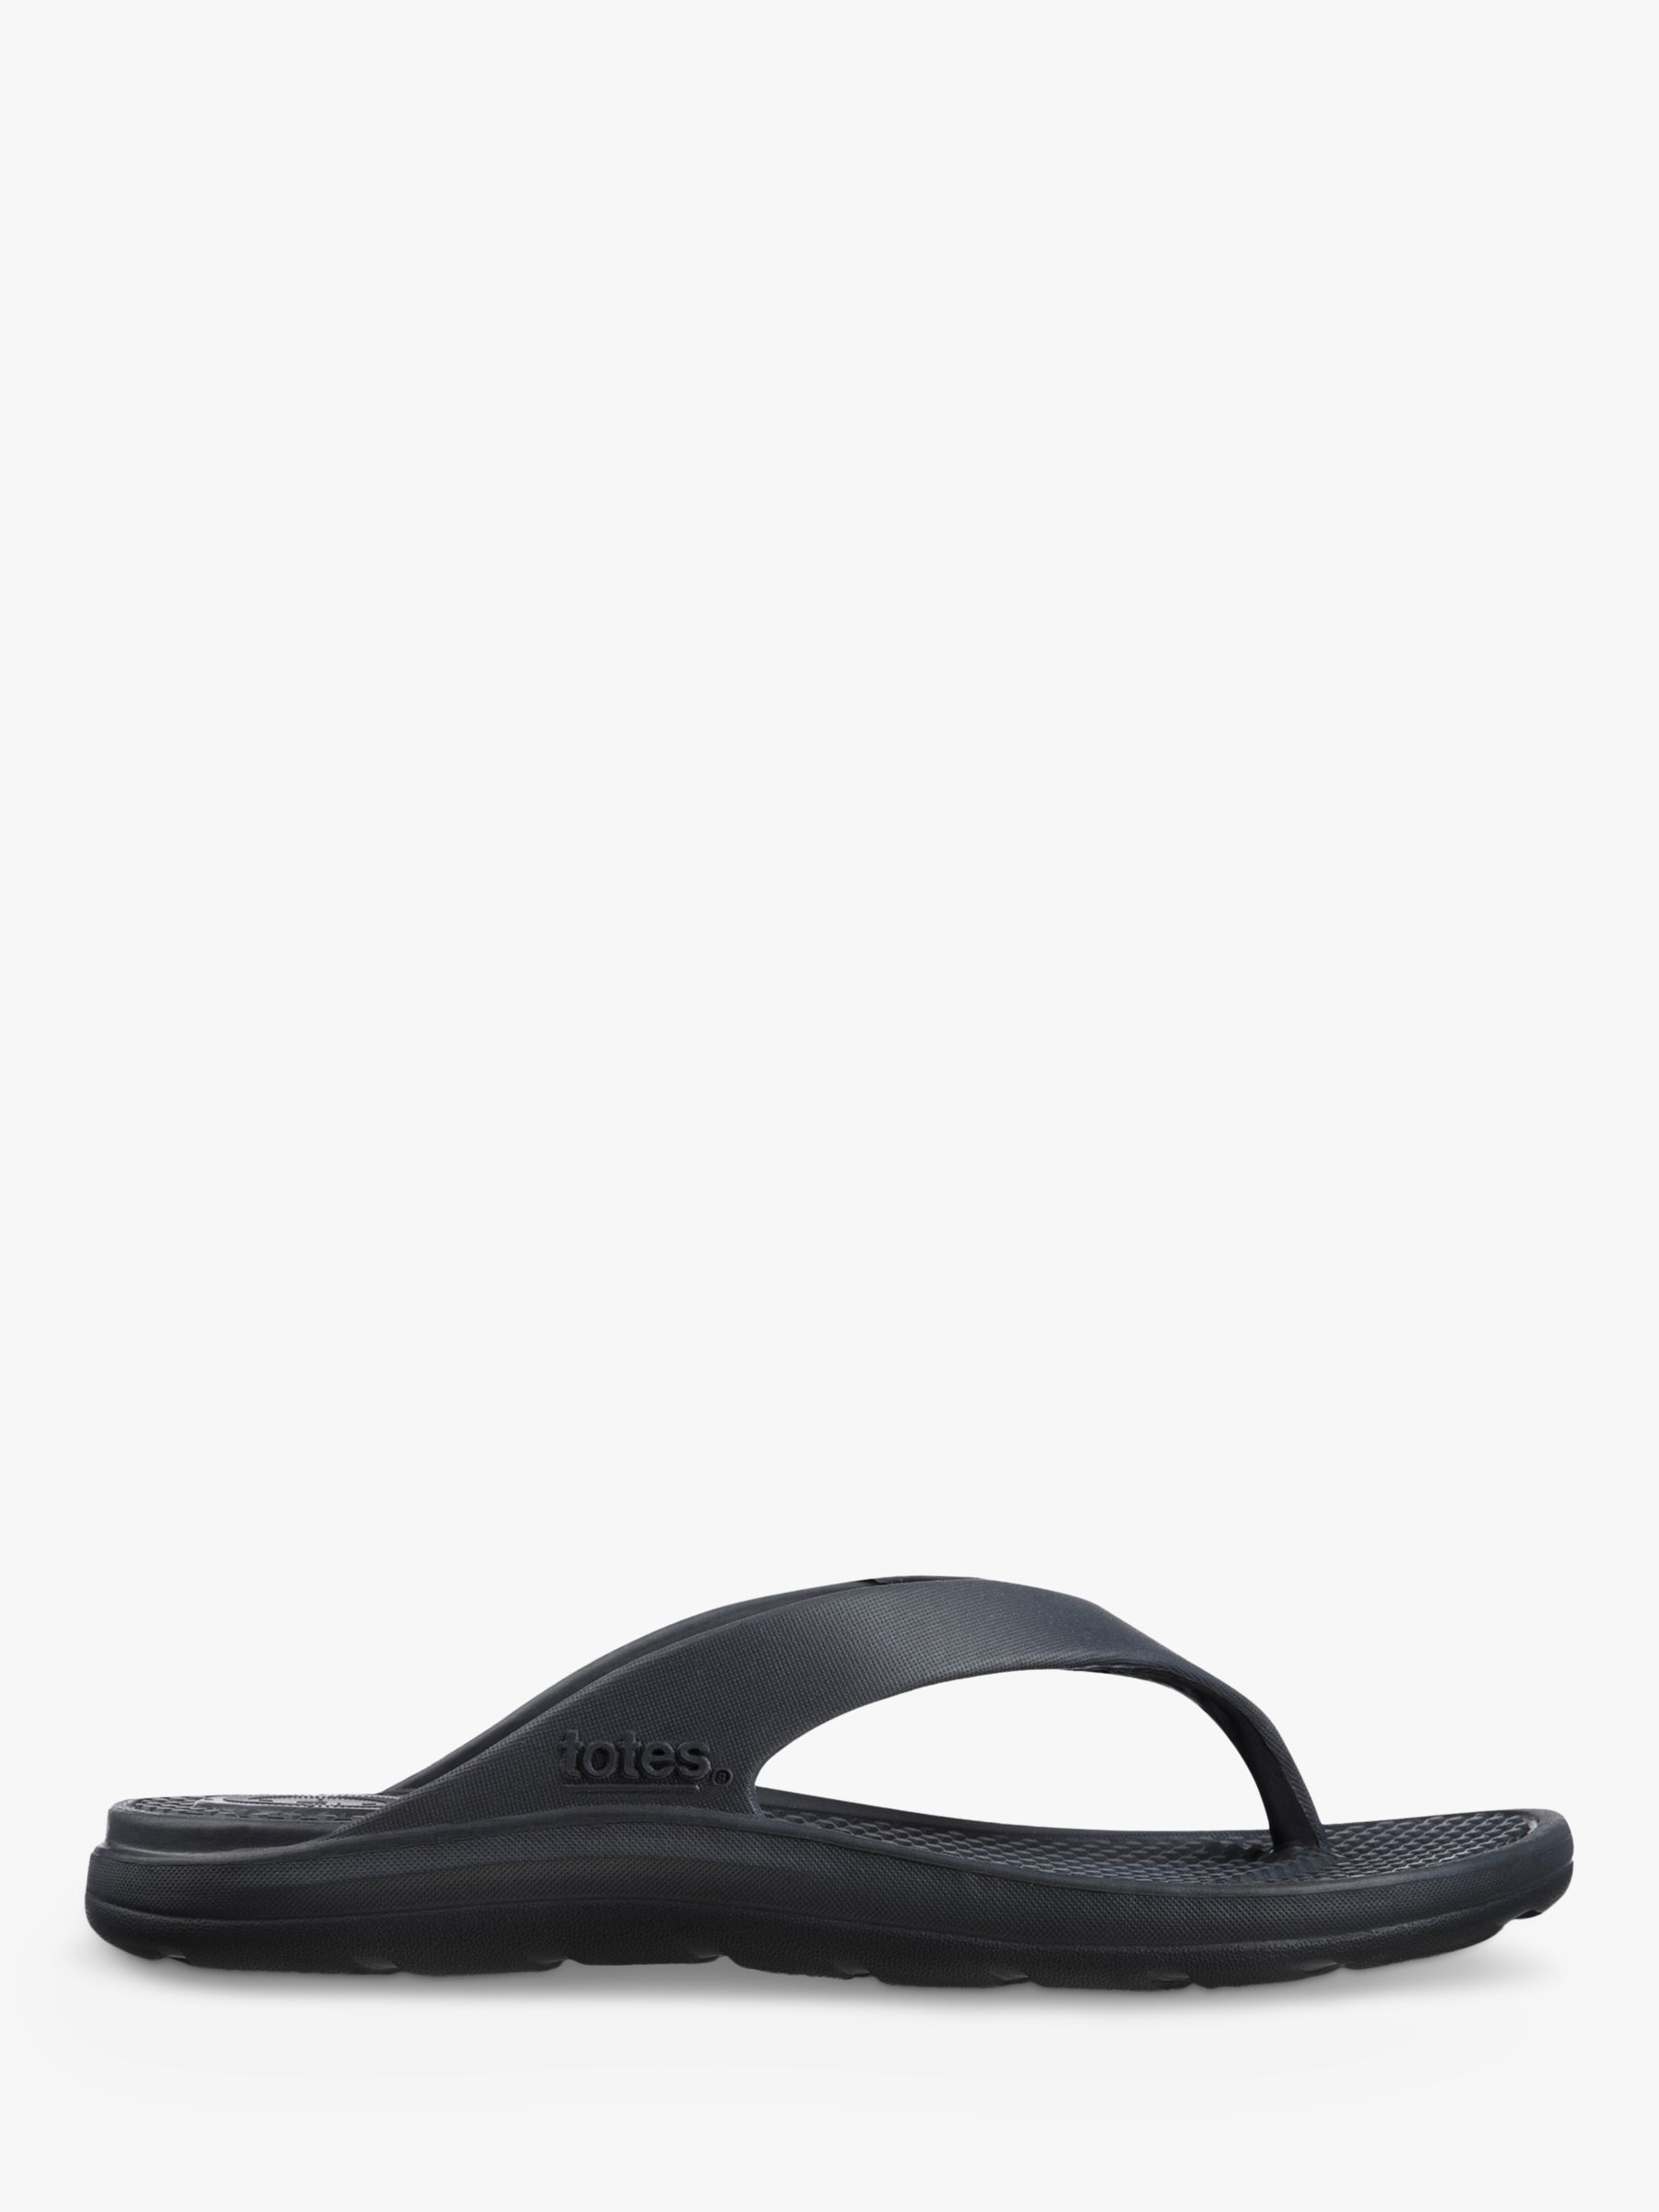 totes SOLBOUNCE Toe Post Sandals, Mineral at John Lewis & Partners